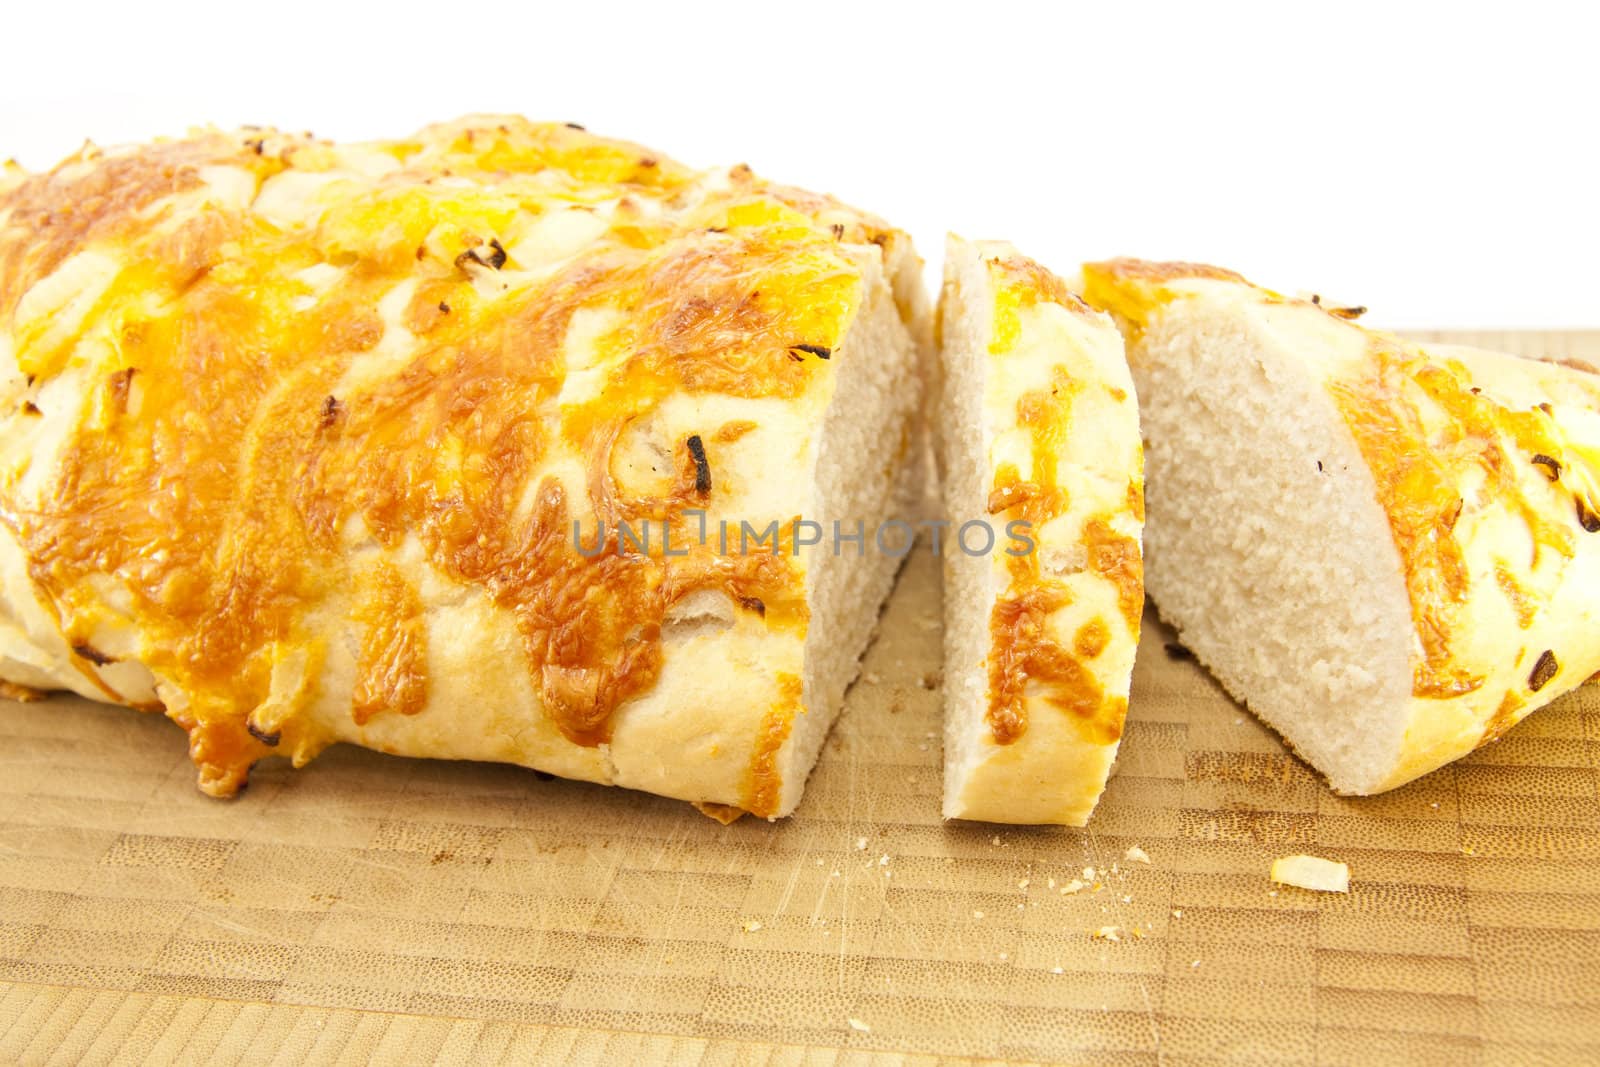 Cheese and Onion Bread by ChrisAlleaume